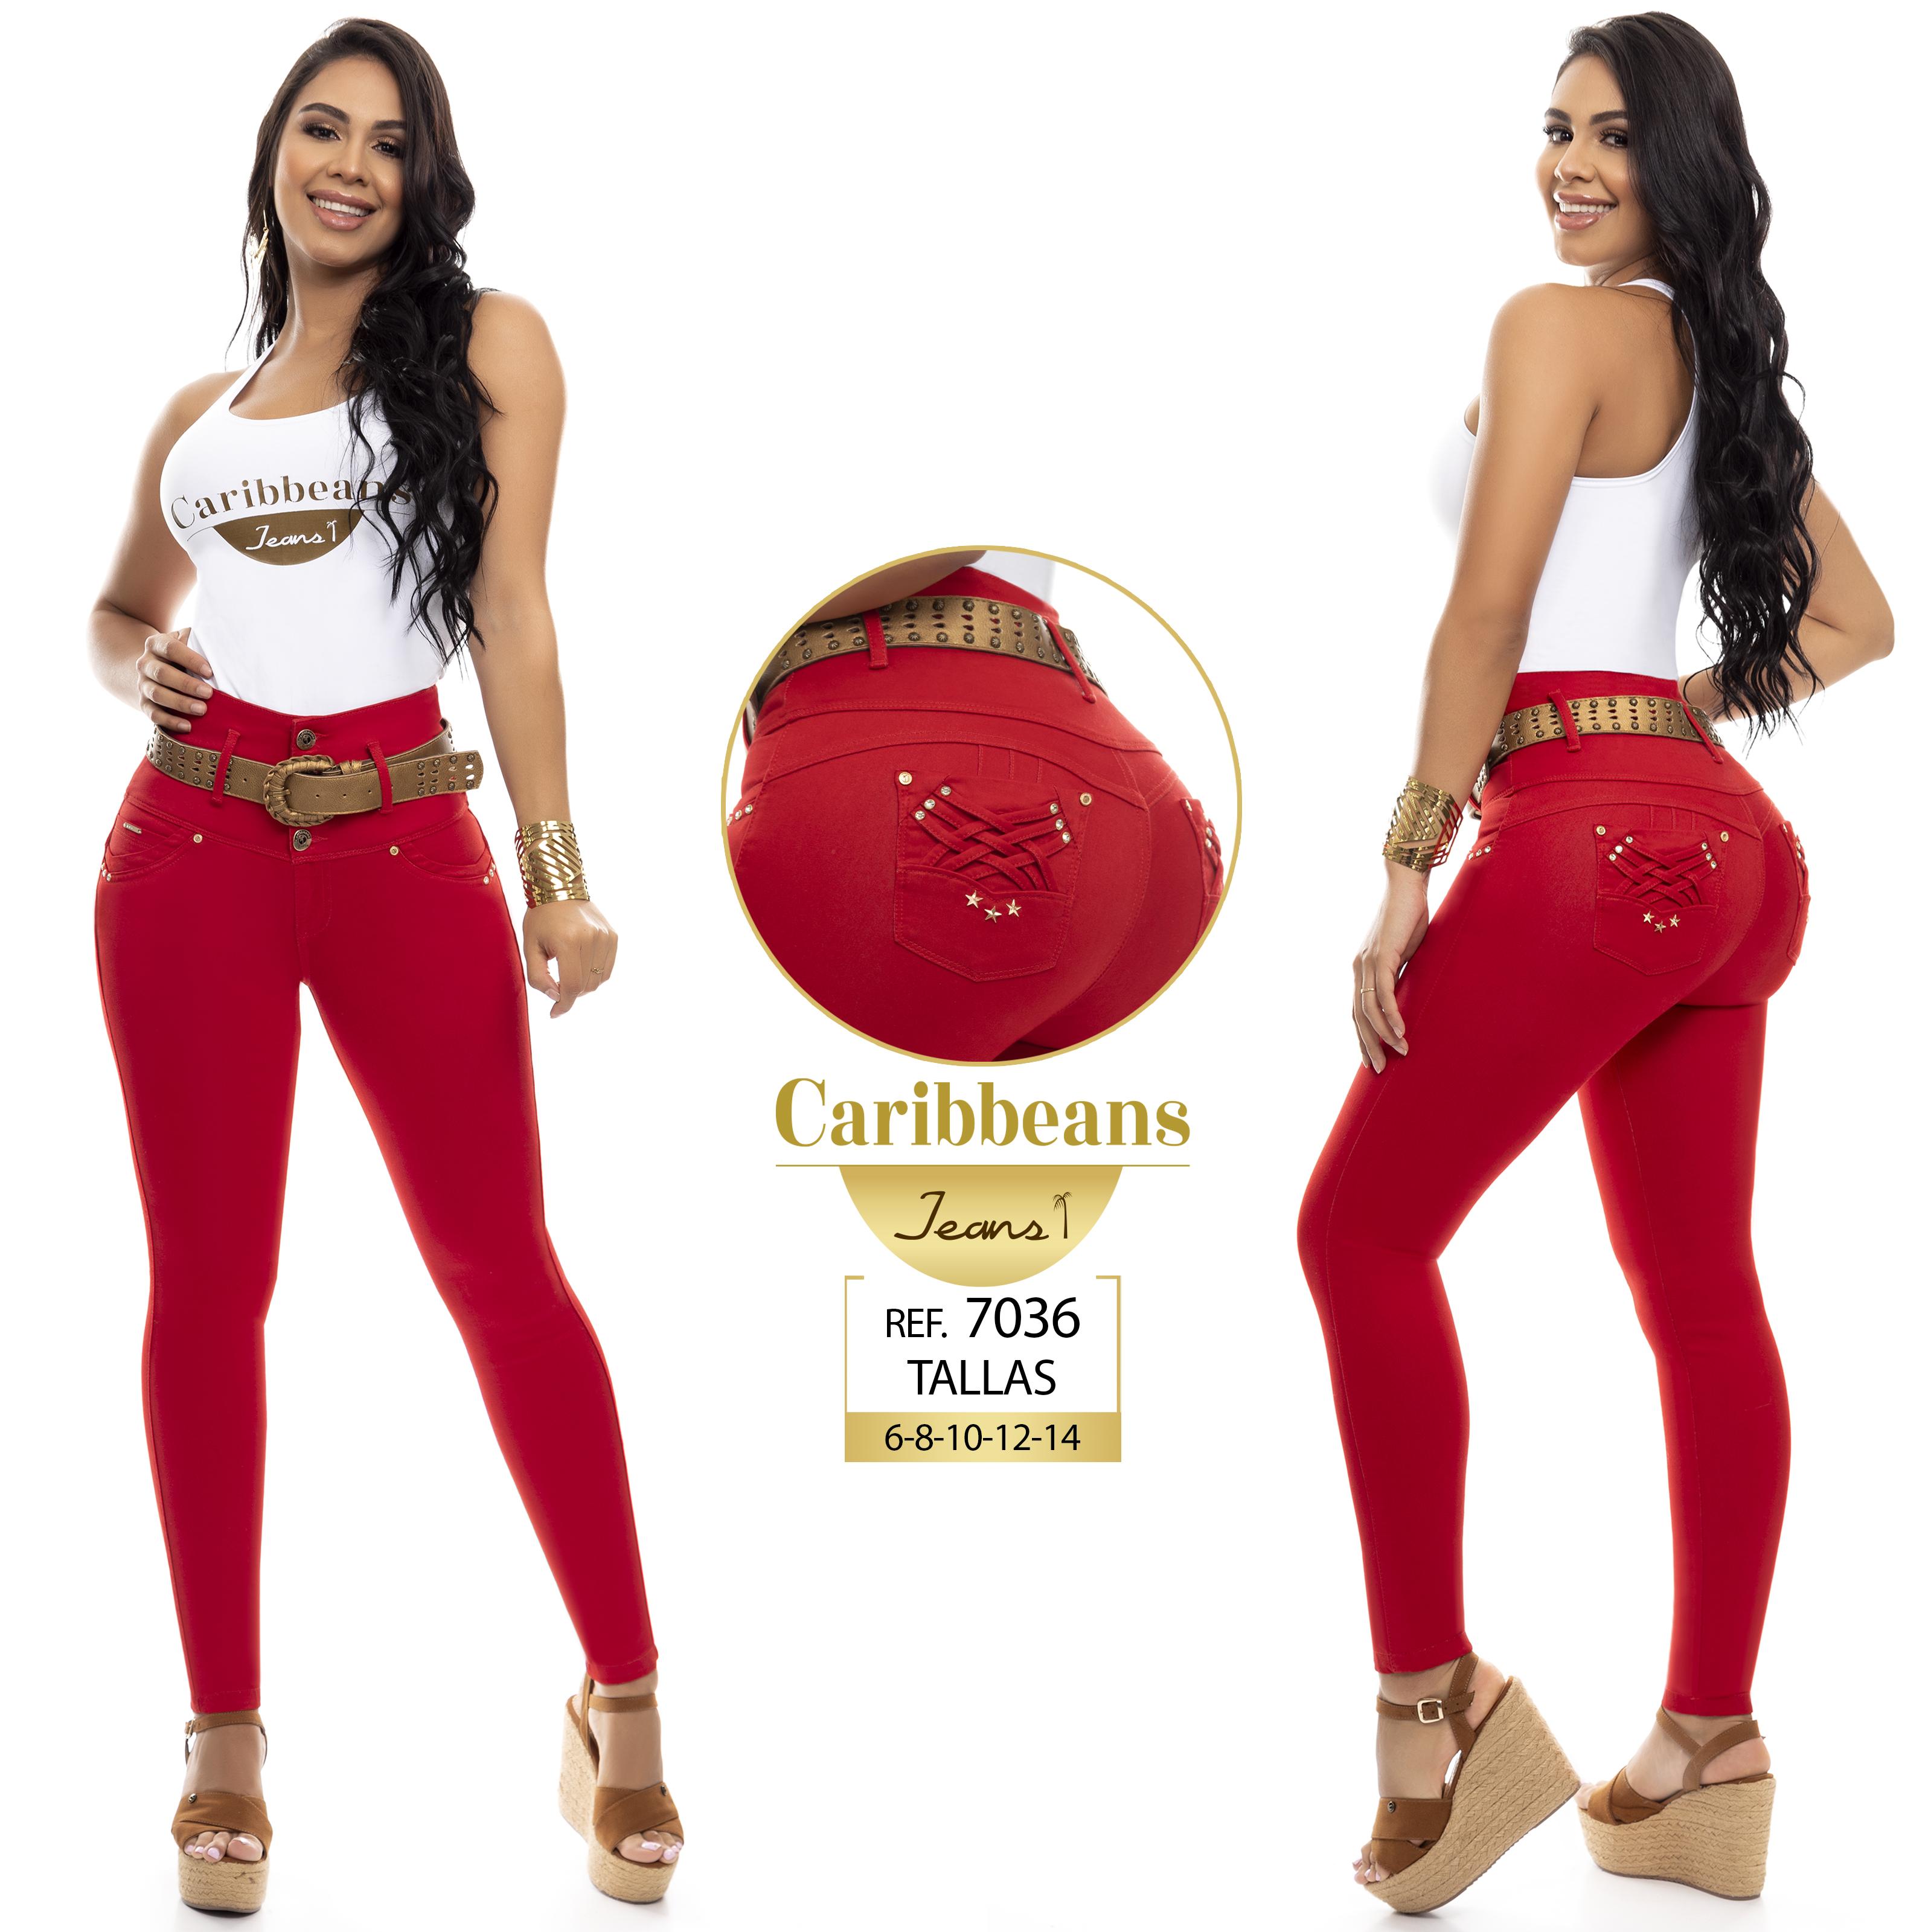 Comprar push up Colombiano online